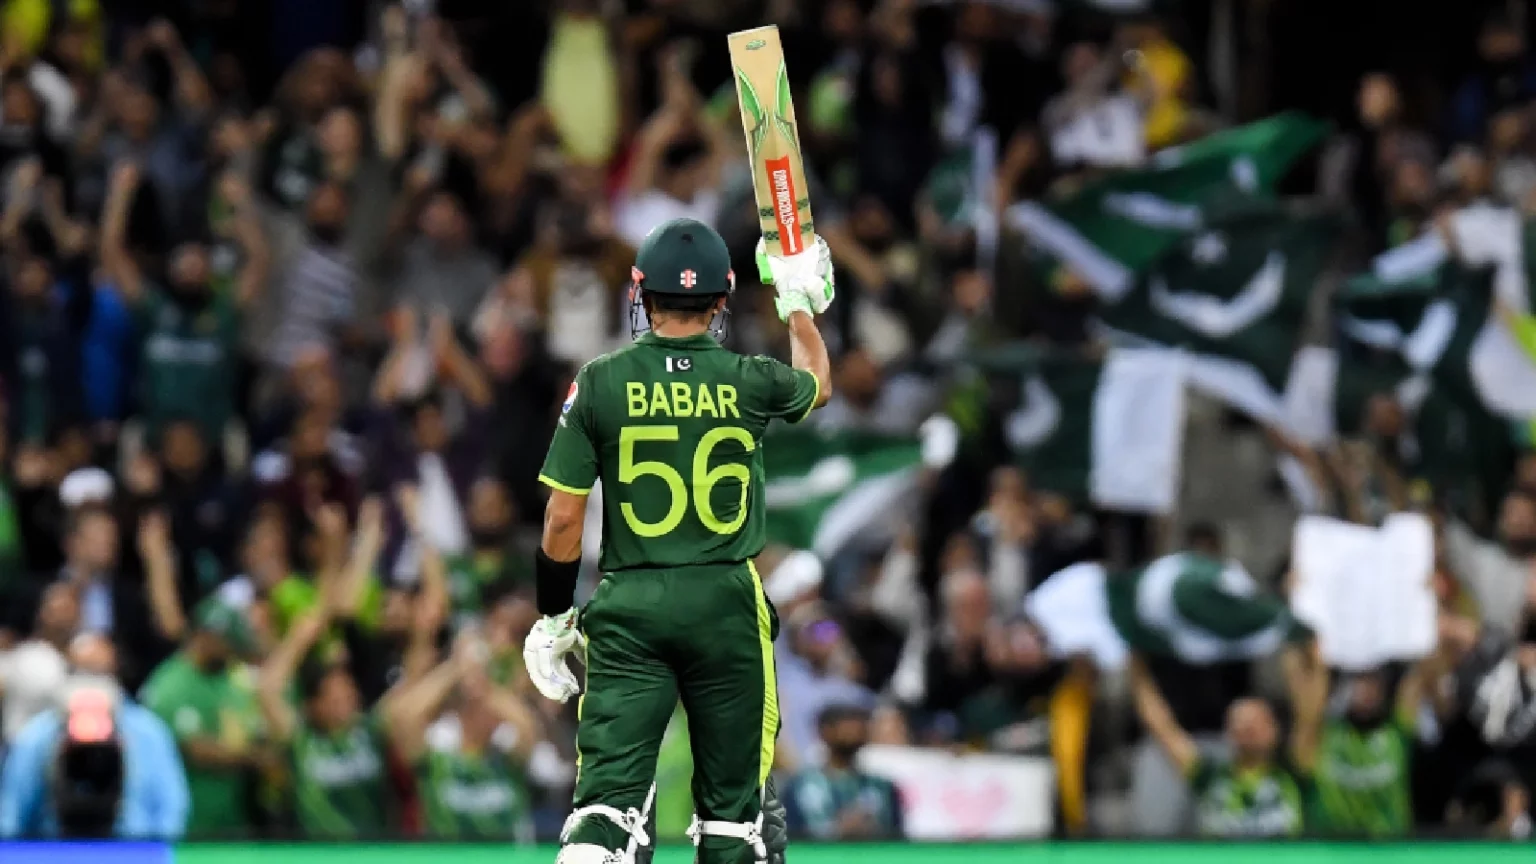 babar-azam-becomes-fastest-to-score-5000-odi-runs-is-he-becoming-the-greatest-batsman-of-this-era-distinct-view